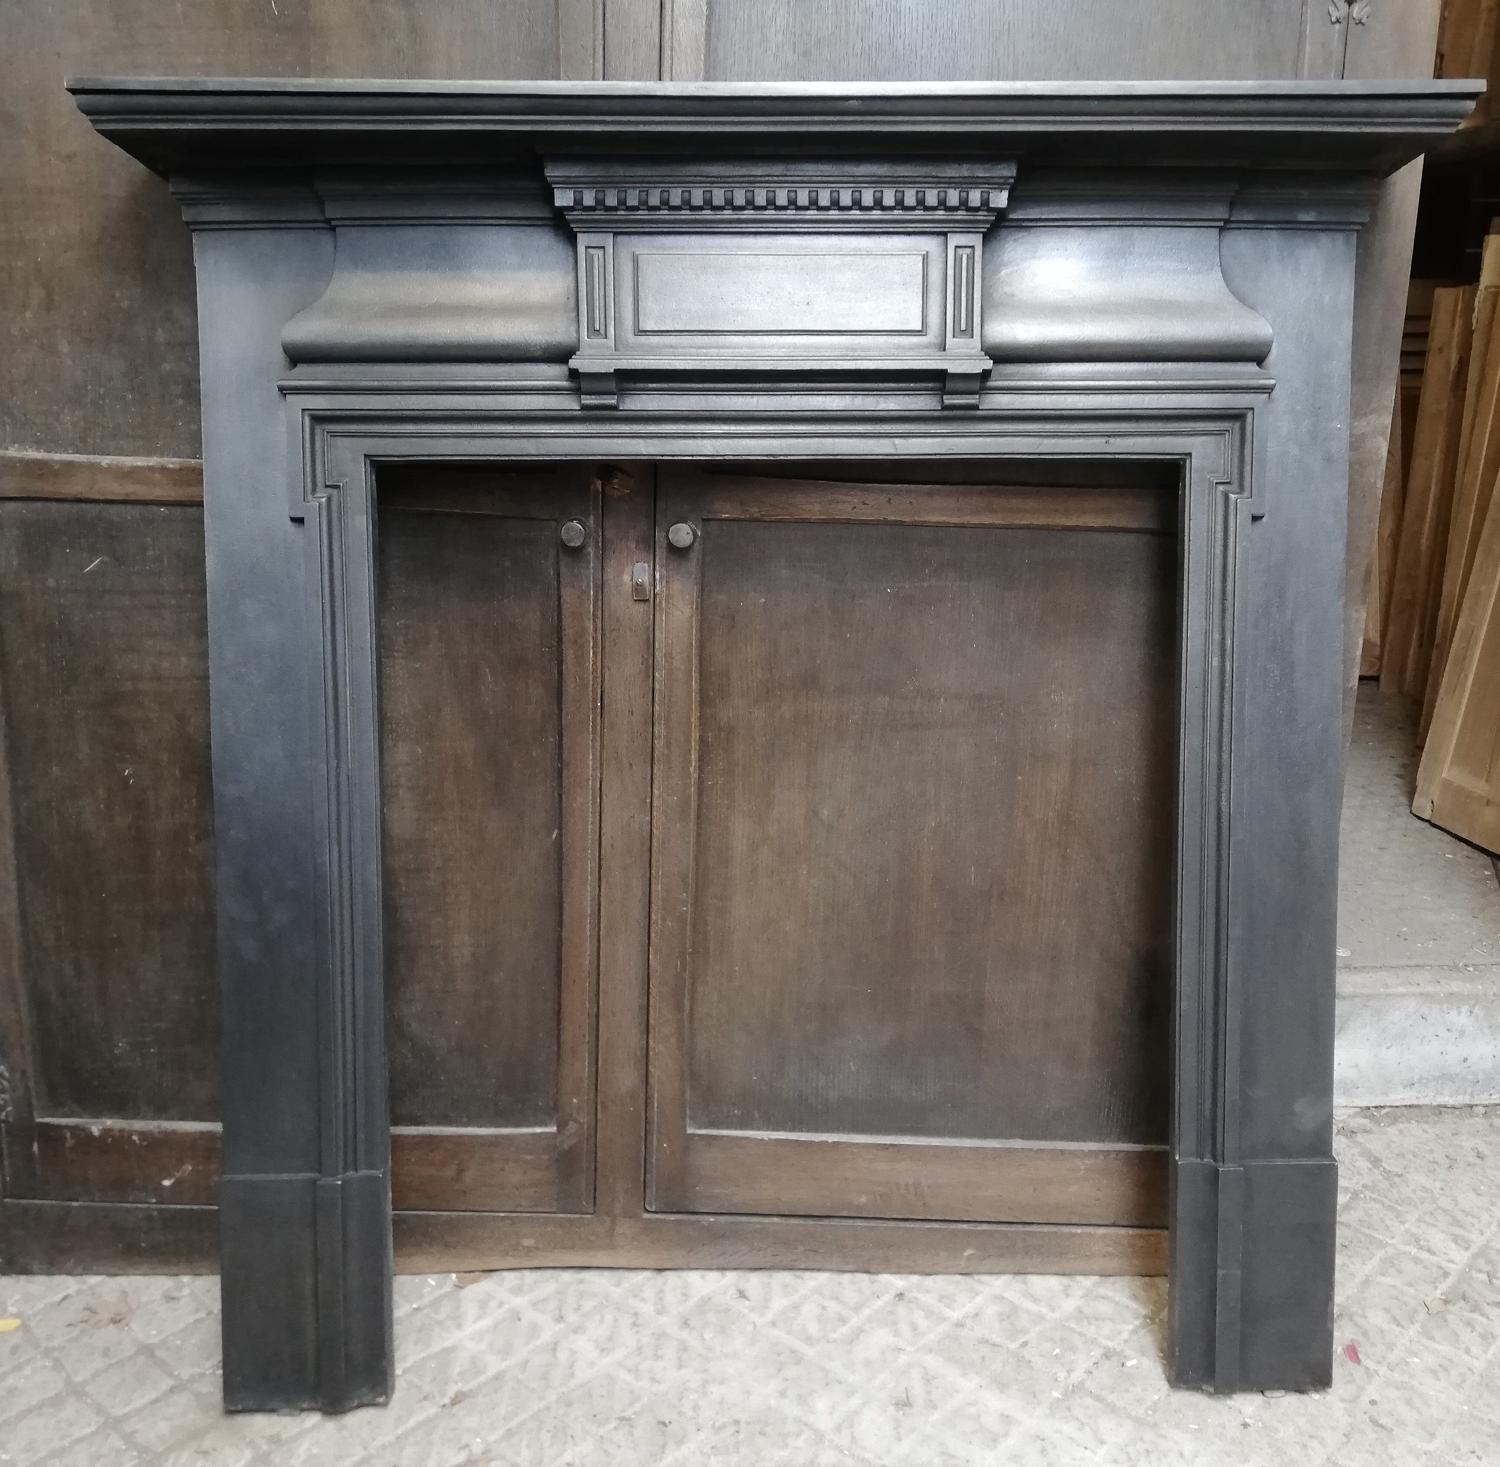 FS0045 LARGE VICTORIAN CAST IRON FIRE SURROUND FOR WOOD BURNER